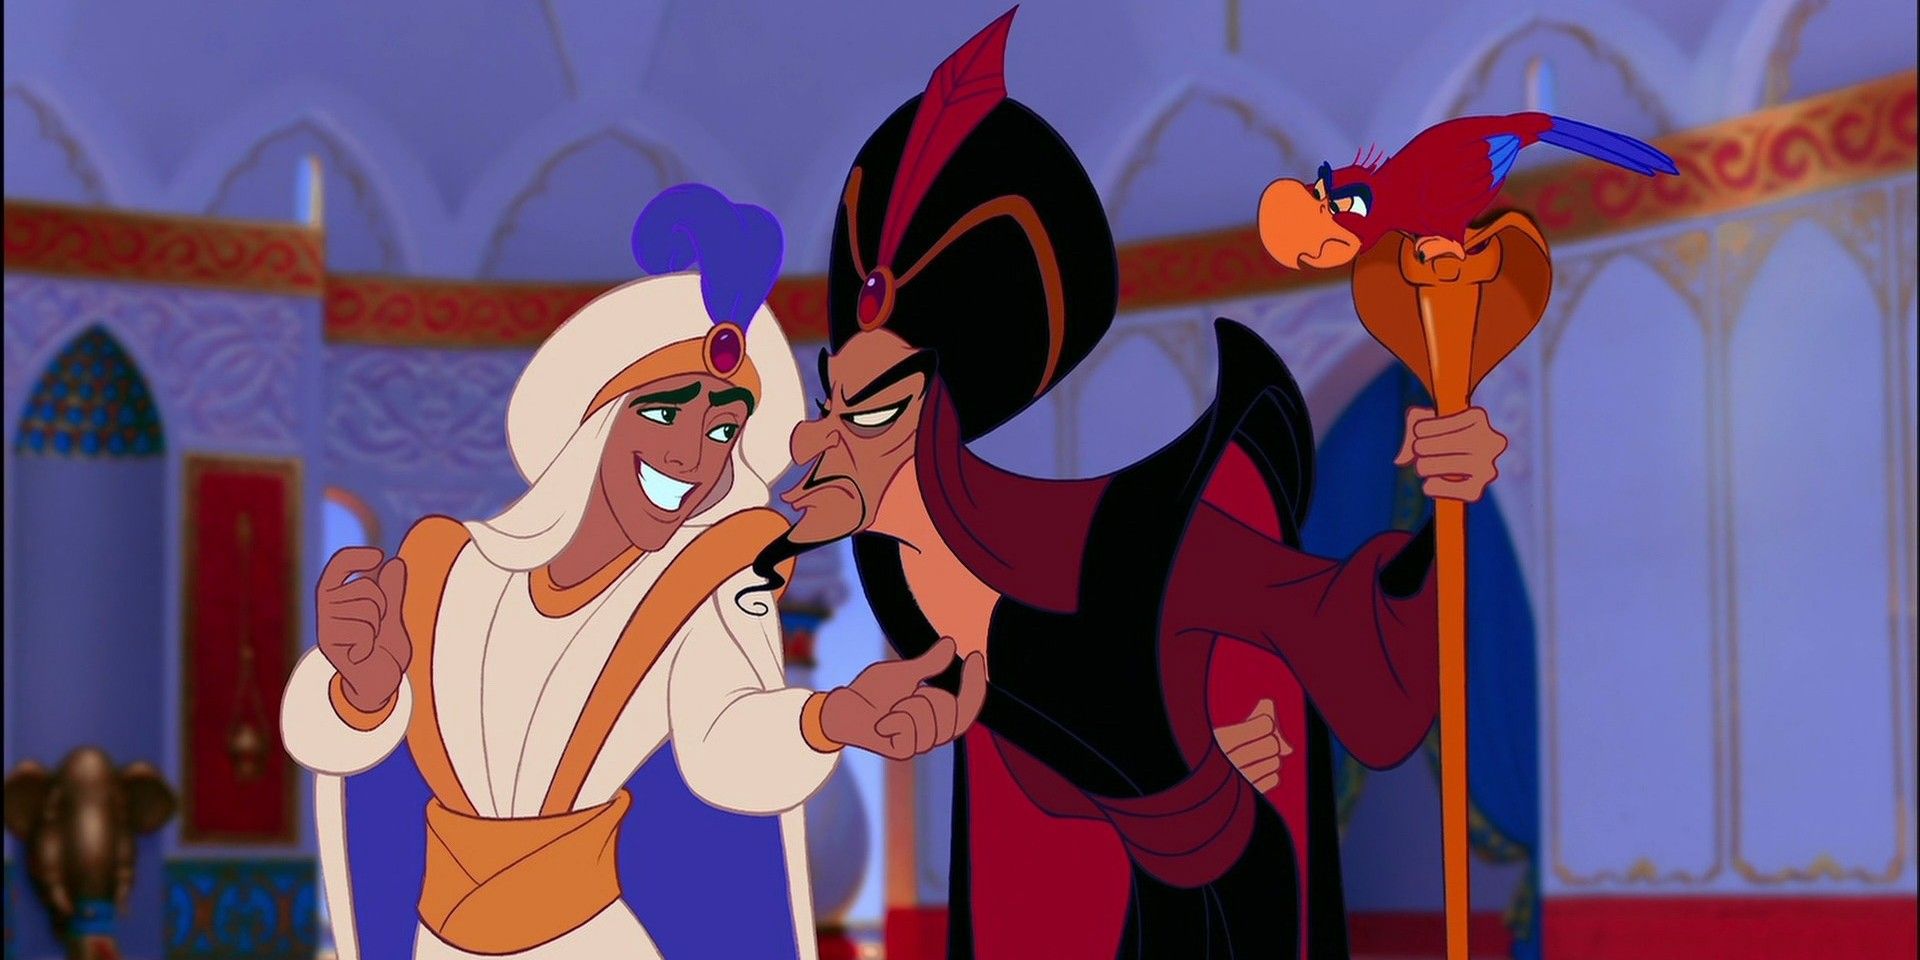 Aladdin Smiling While Jafar And Iago Look At Him Angrily In The Disney Movie